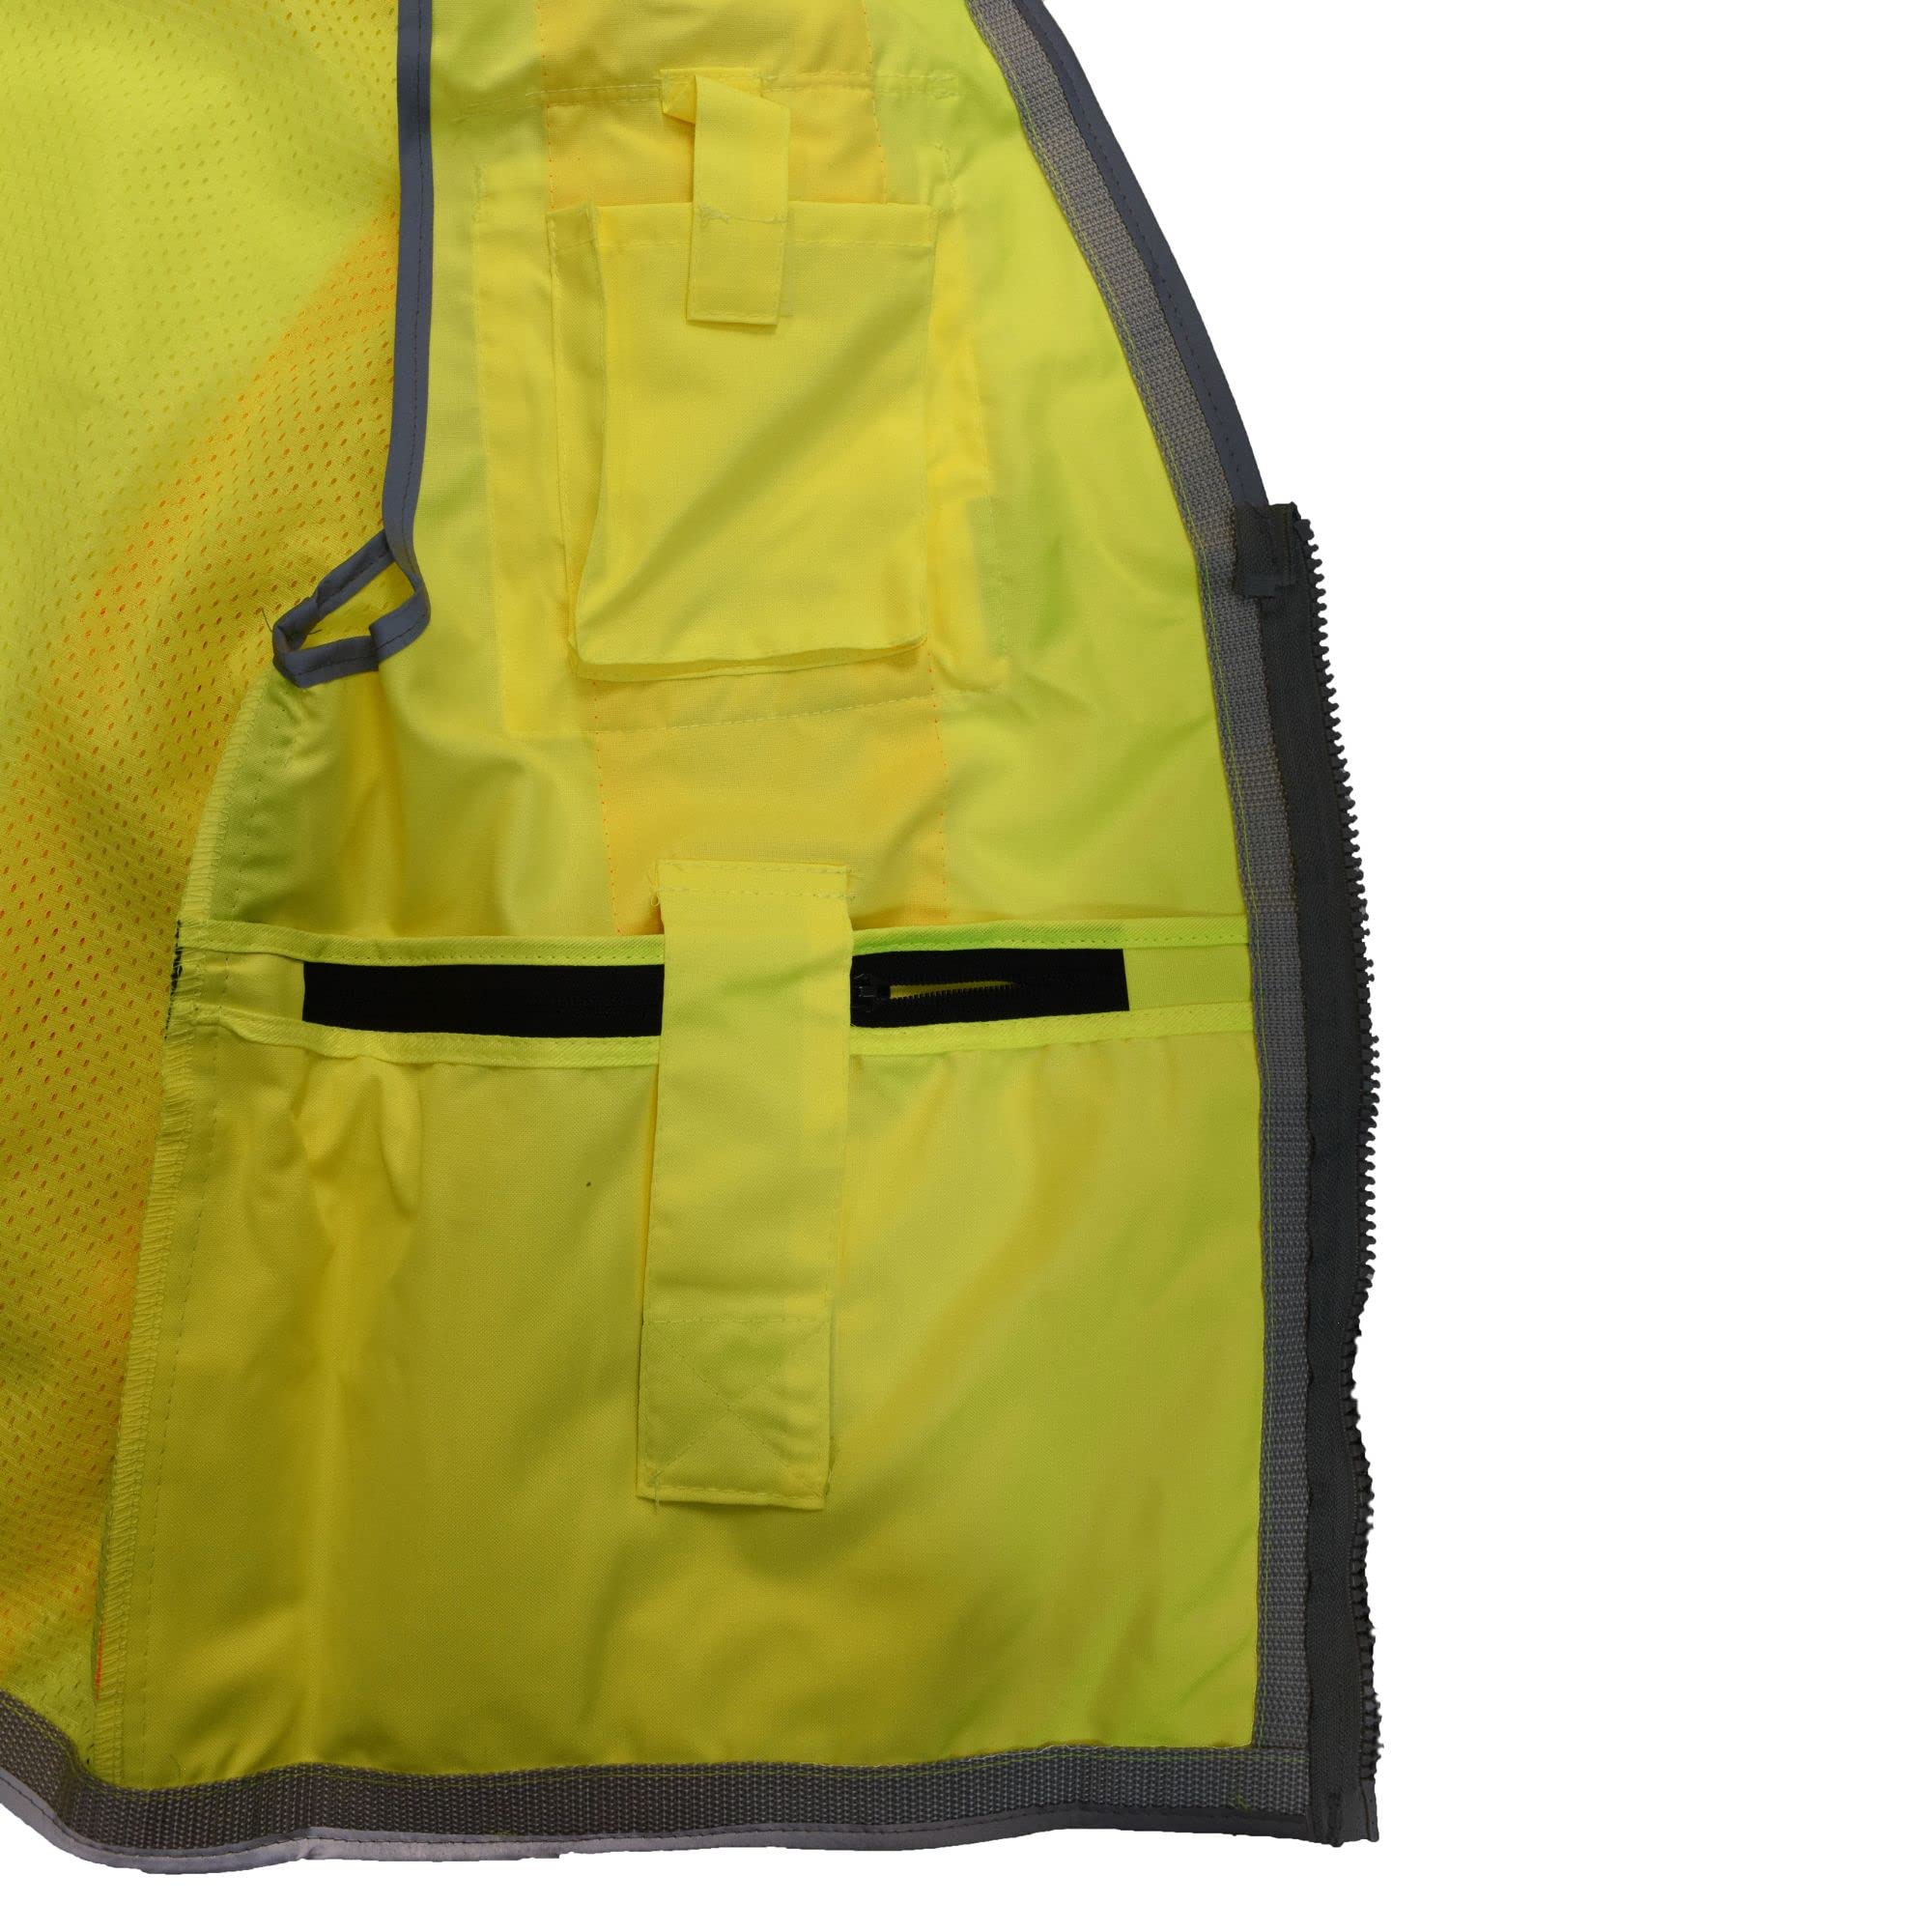 Radians SV55 Class 2 Heavy Woven Two Tone Engineer Vest with Padded Neck to Support Extra Weight in Cargo Pockets